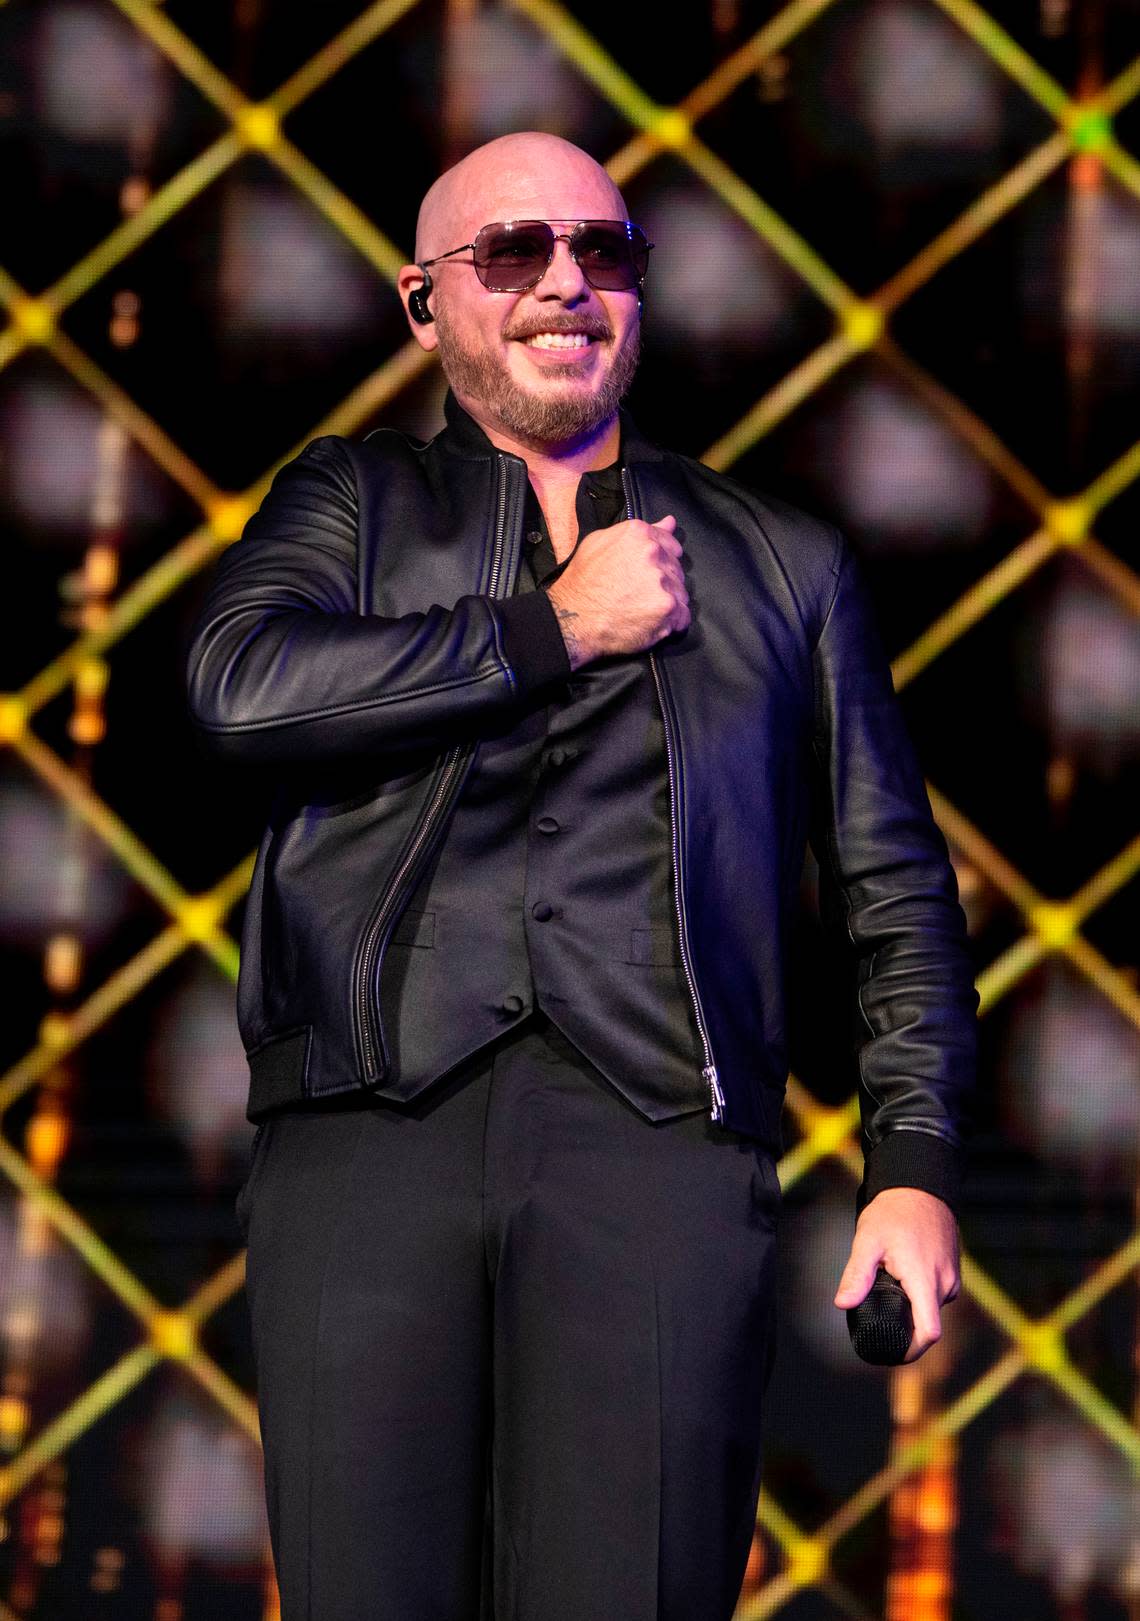 Pitbull reacts to the screaming crowd at Coastal Credit Union Music Pavilion at Walnut Creek in Raleigh, N.C., Thursday night, July 28, 2022.